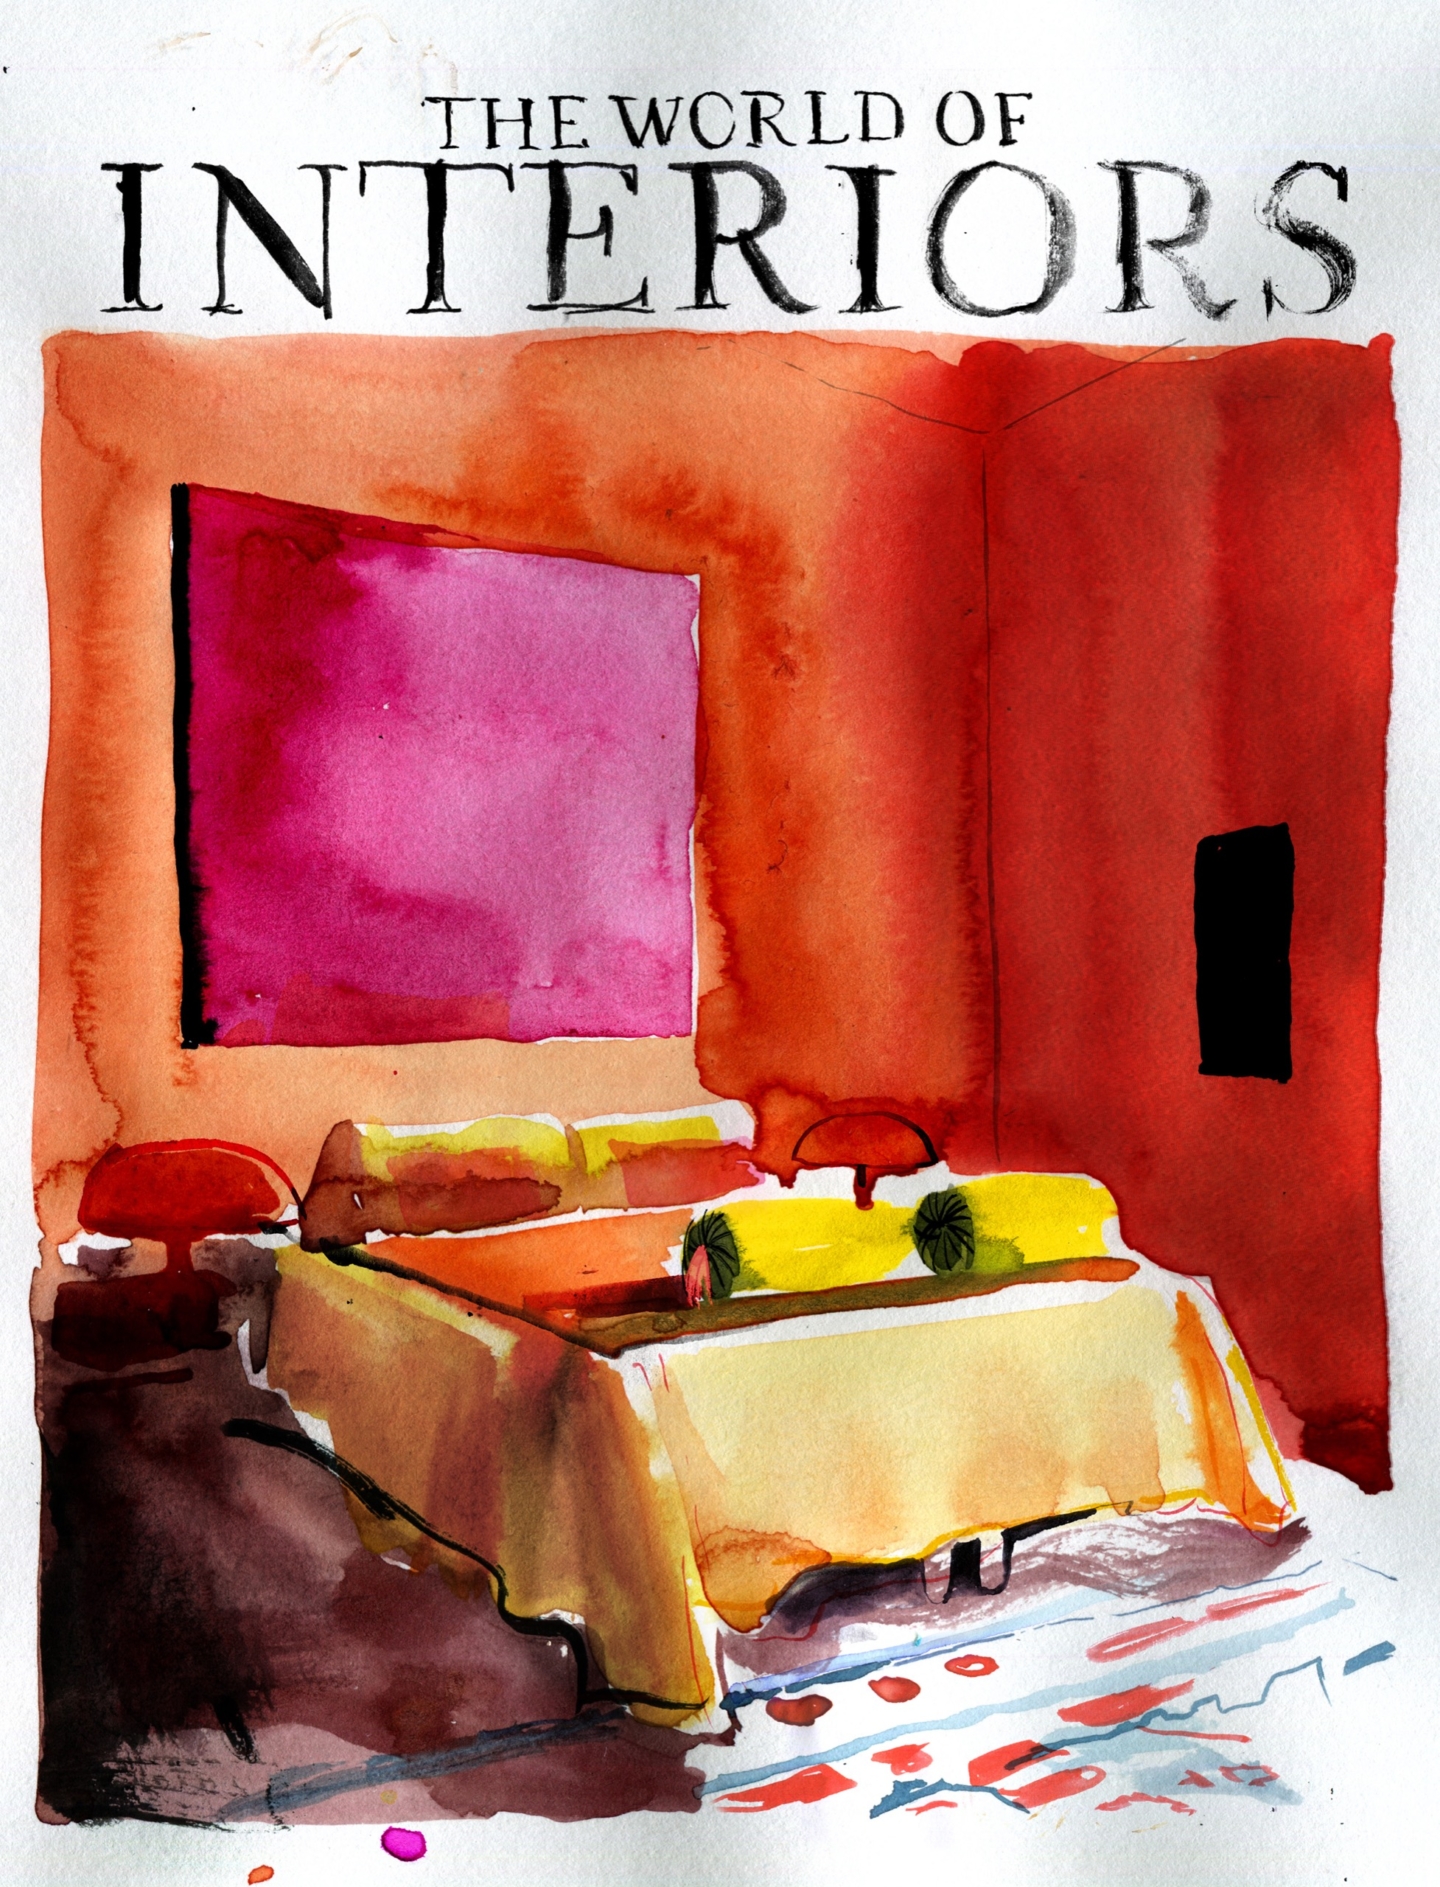 Elisabeths favourite Cover of The World of Interiors